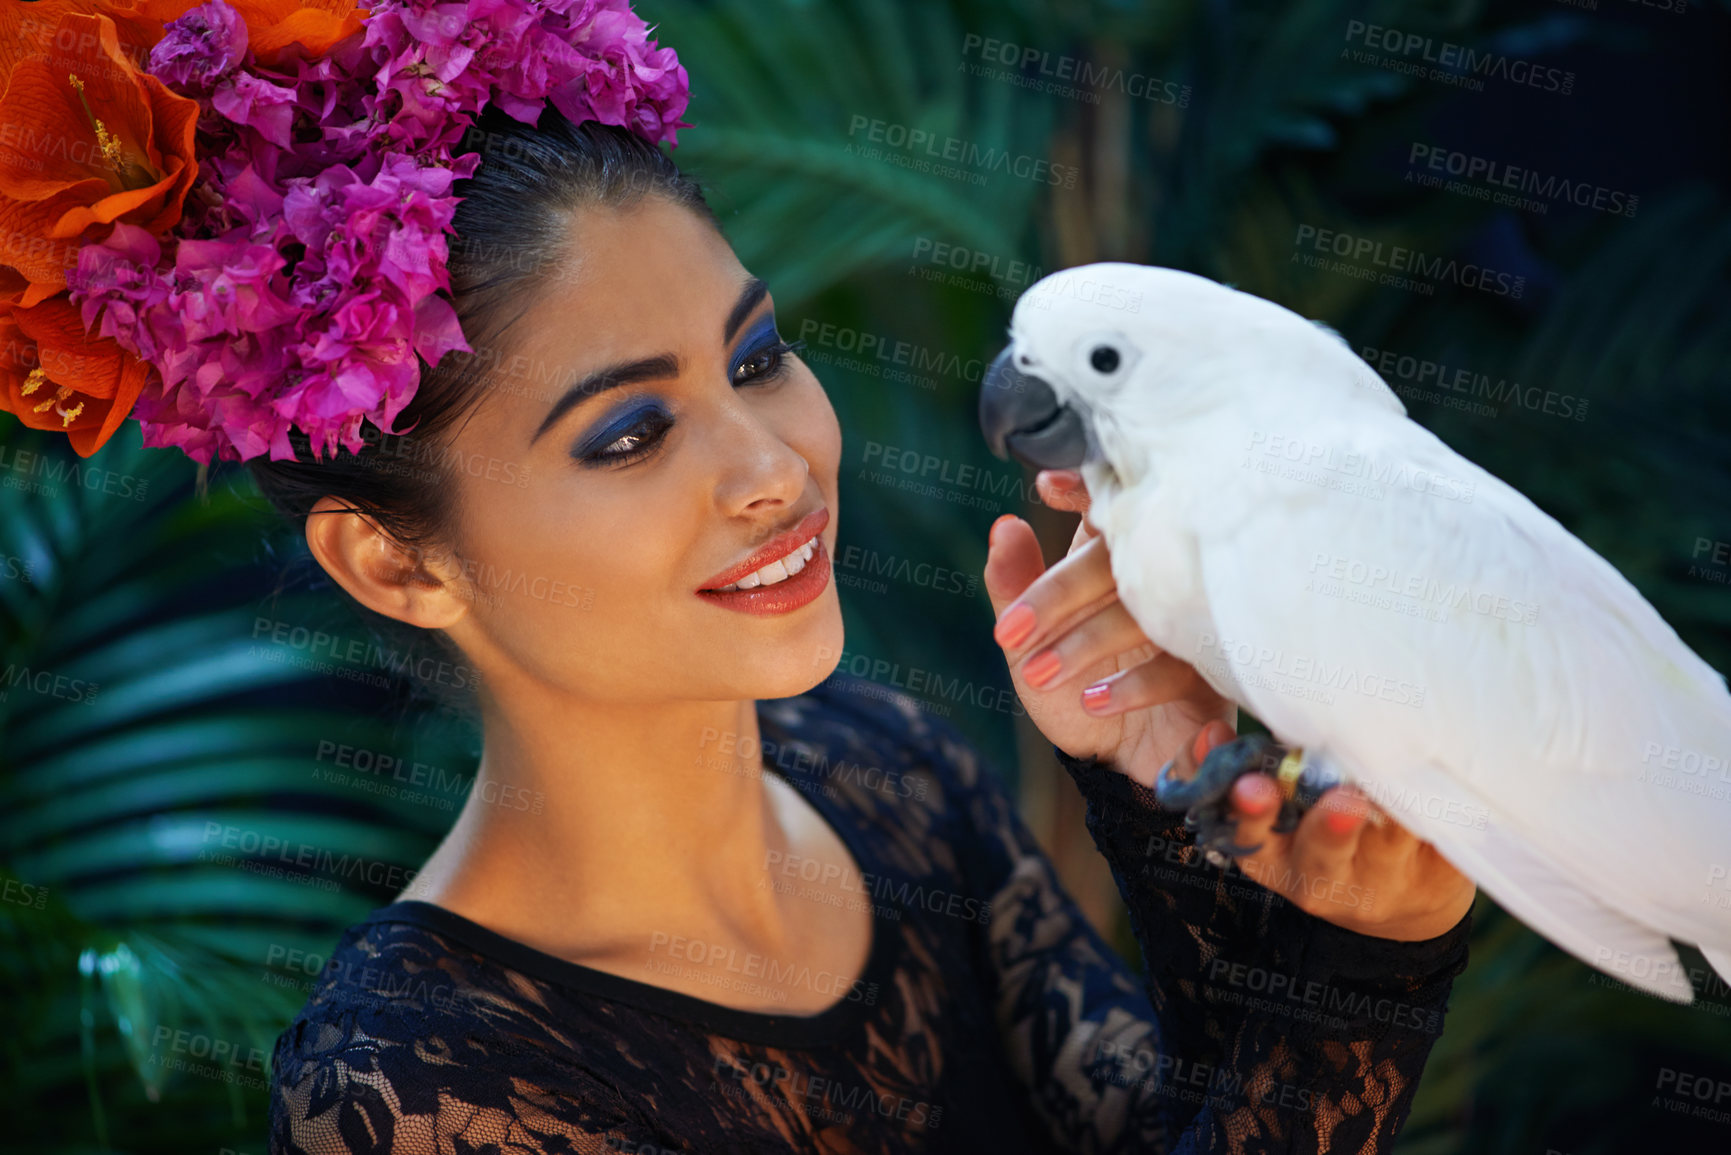 Buy stock photo Jungle, bird or woman with flowers or parrot, natural cosmetics for wellness in nature aesthetic. Smile, face or happy female Indian model in rainforest for skincare beauty, pet animal or floral art